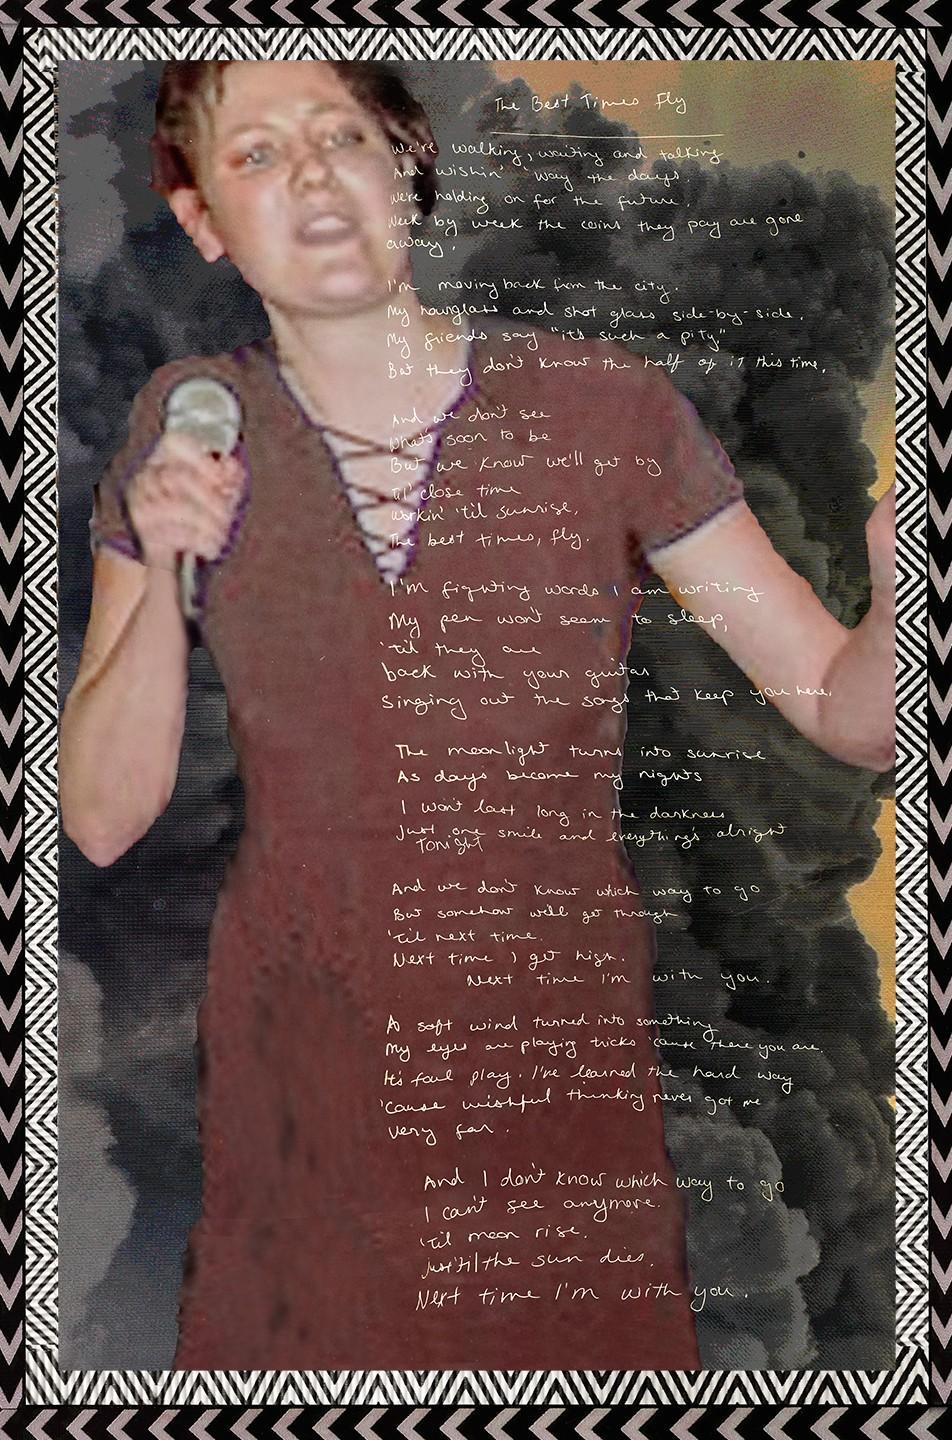 Robin Botie of Ithaca, New York, photoshops an old photo of her daughter, Marika Warden, singing at her concert, making beautiful trouble.